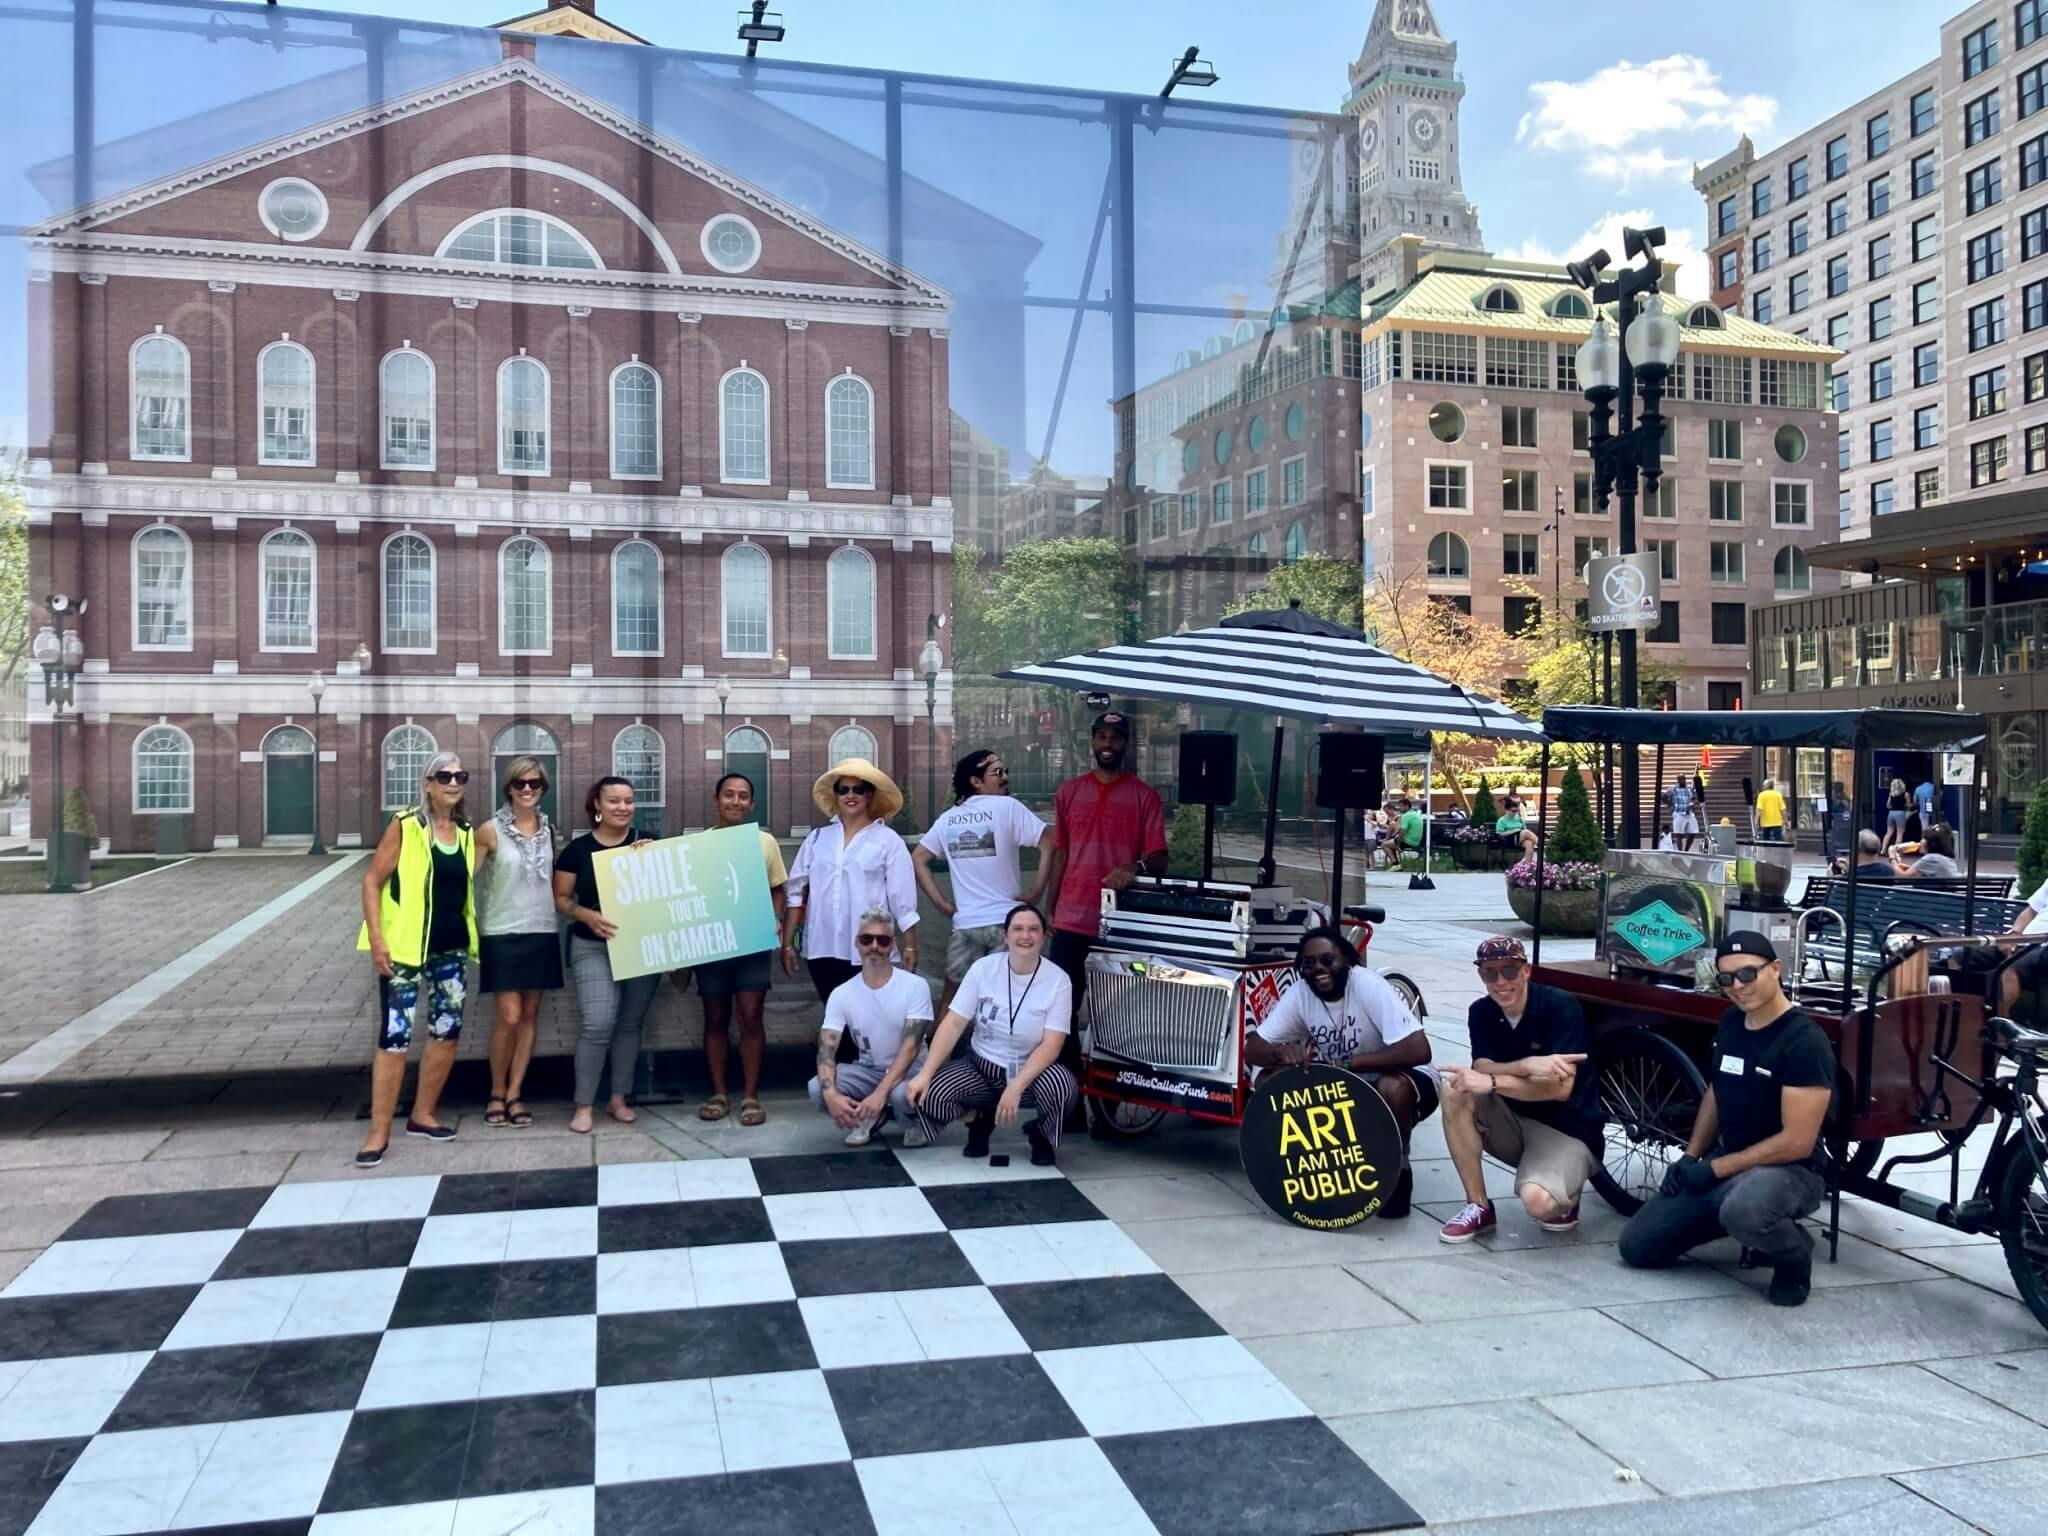 A group of visitors and staff pose in front of a scene of buildings and a black and white checker board sidewalk design.